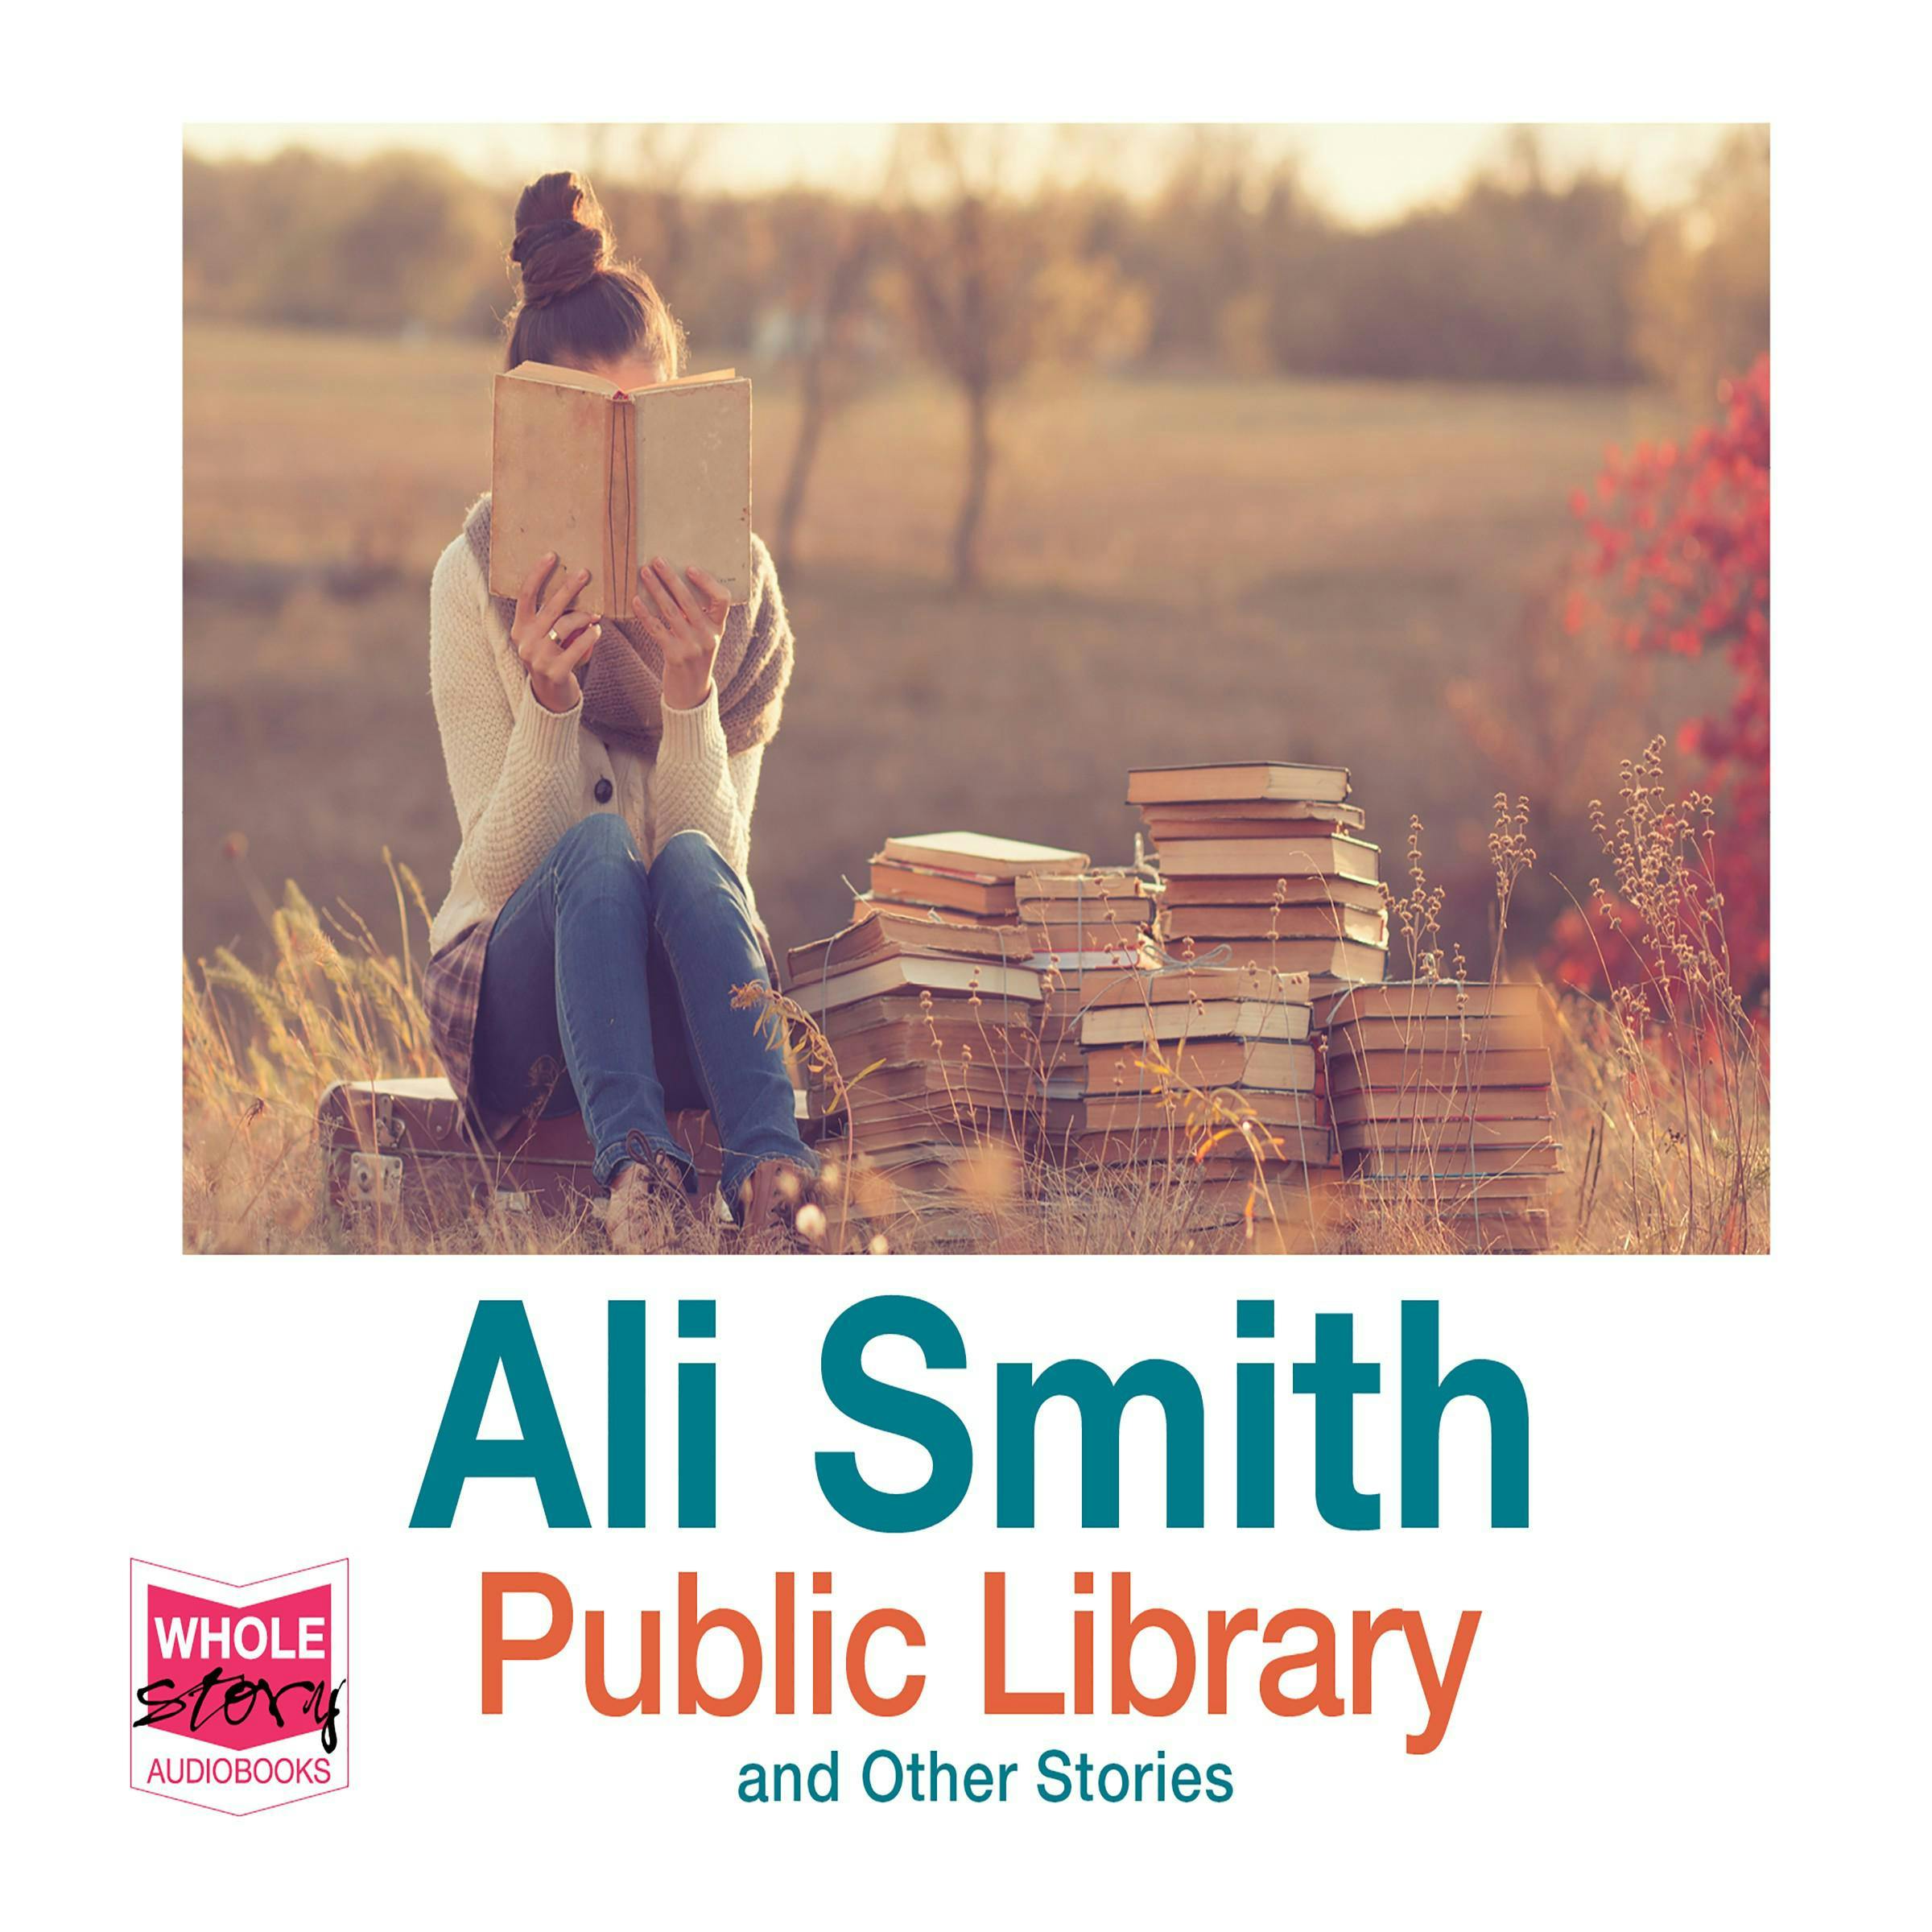 Public Library and Other Stories - Ali Smith